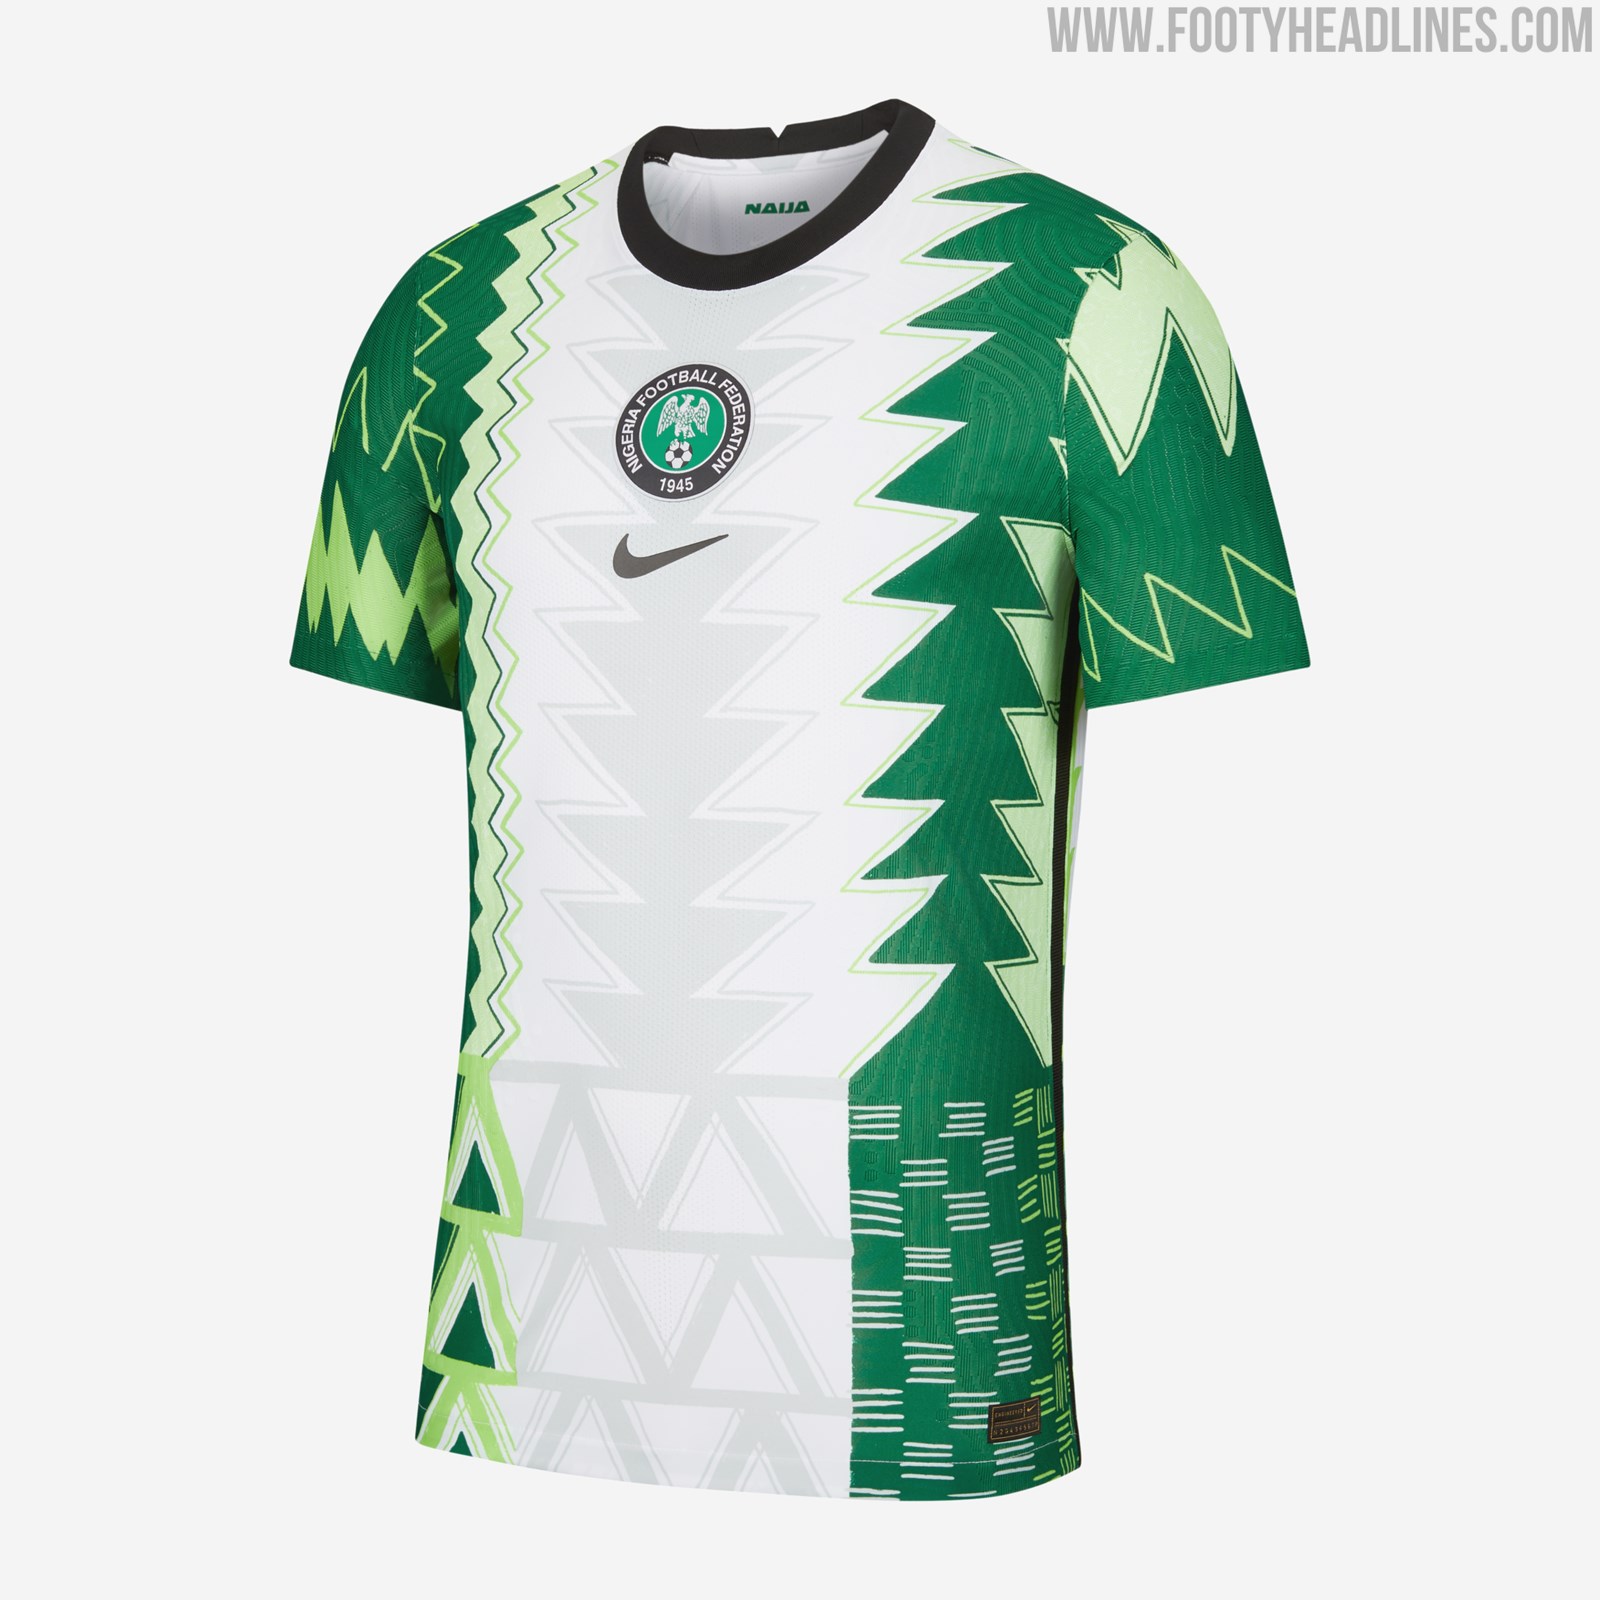 Nigeria 2020-21 Home & Away Kits Released - Now Everywhere Footy